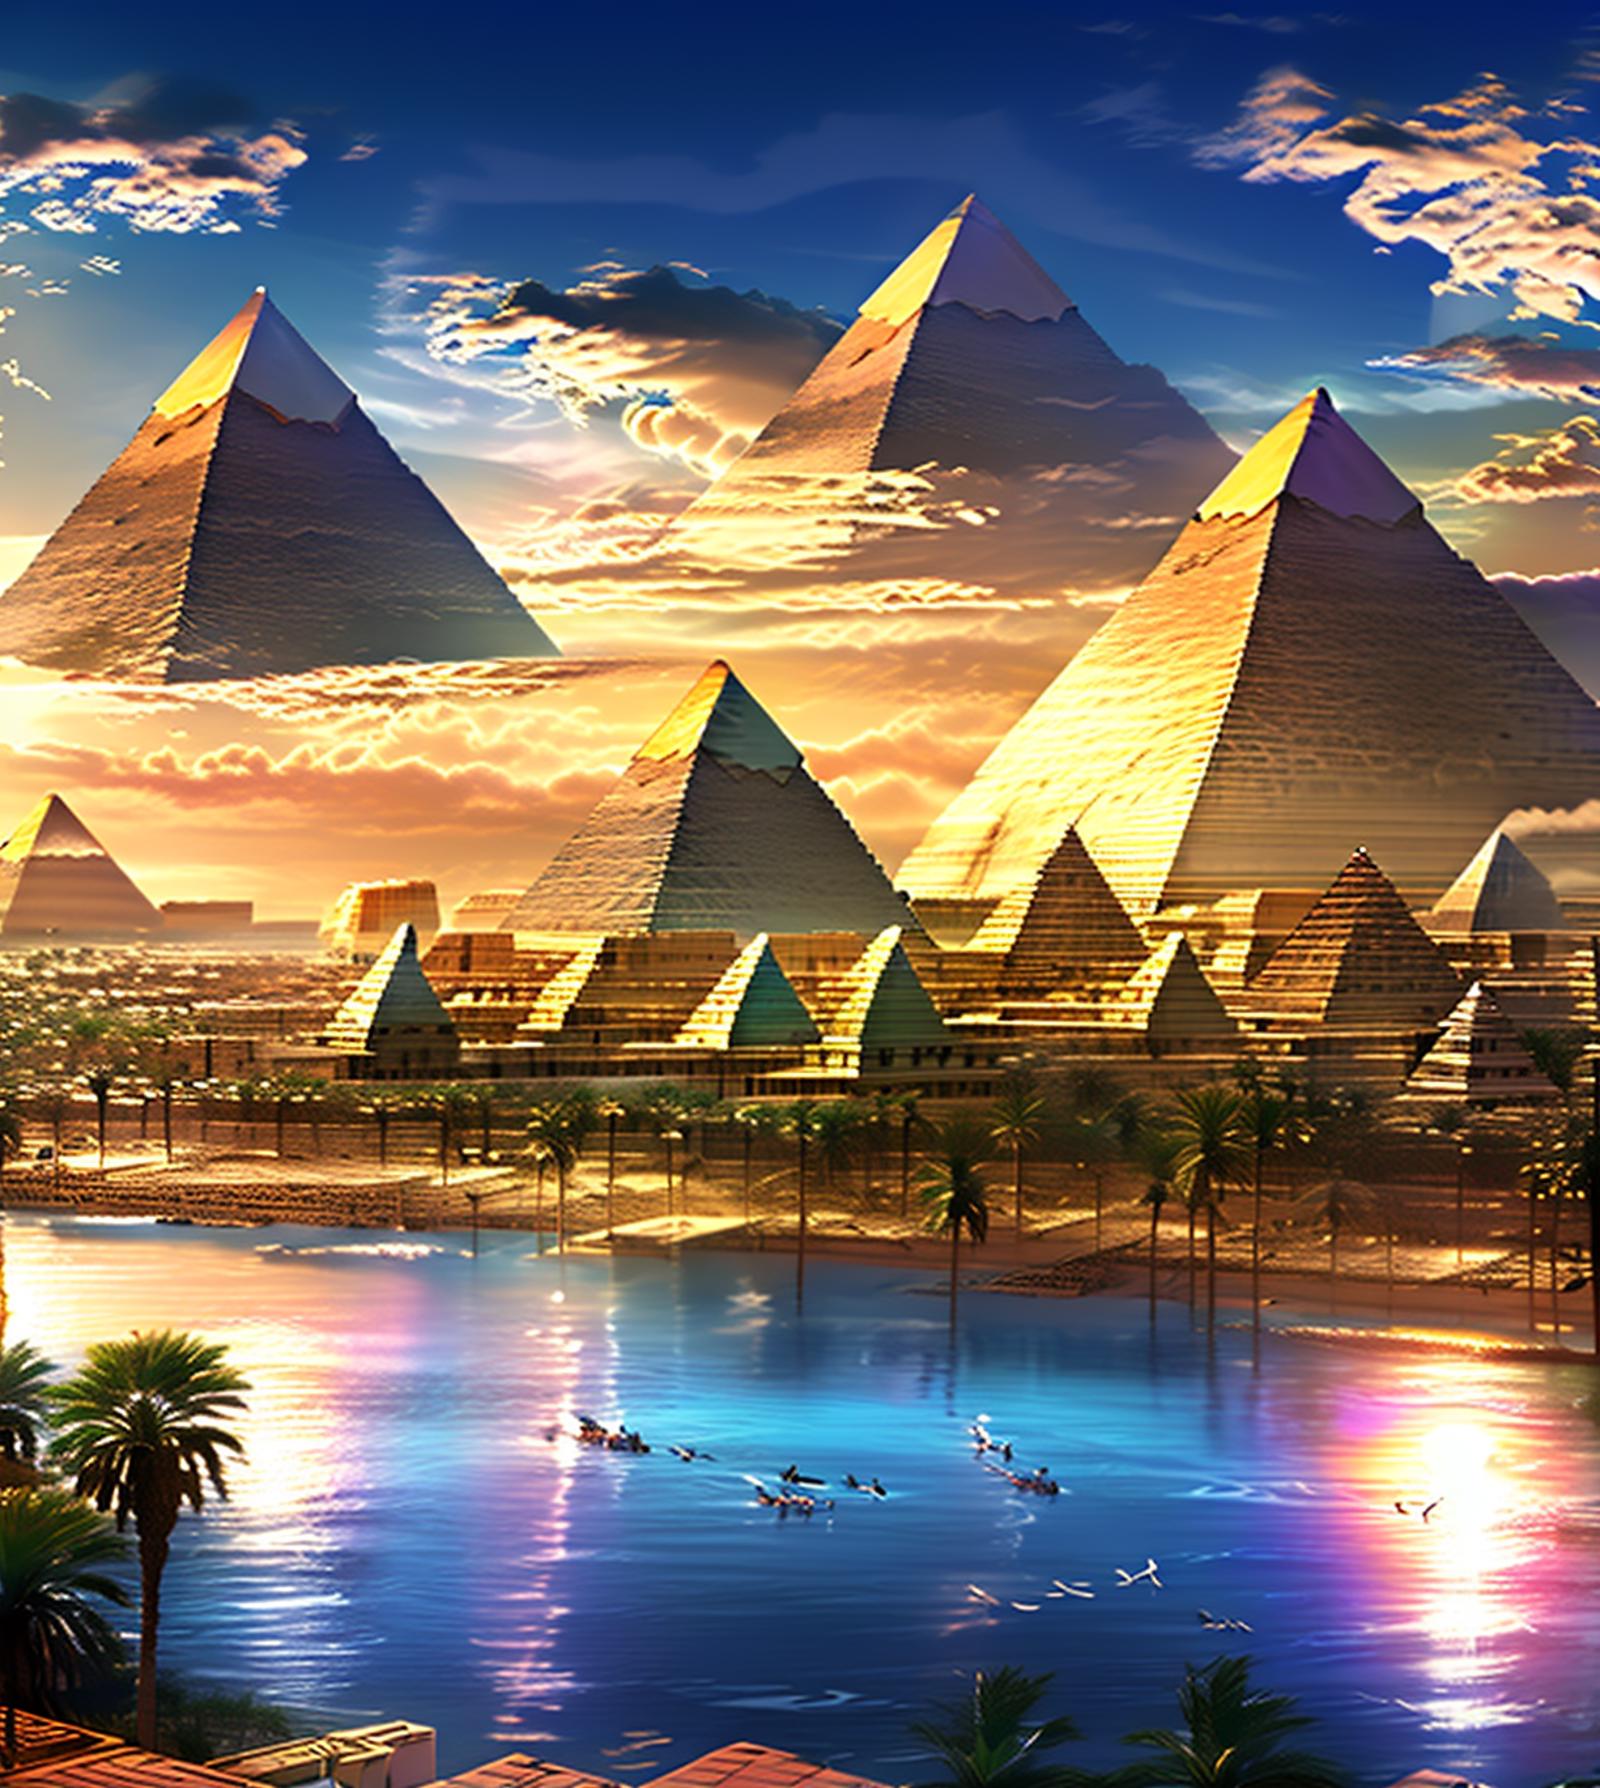 Egypt Background image by Cecily_cc